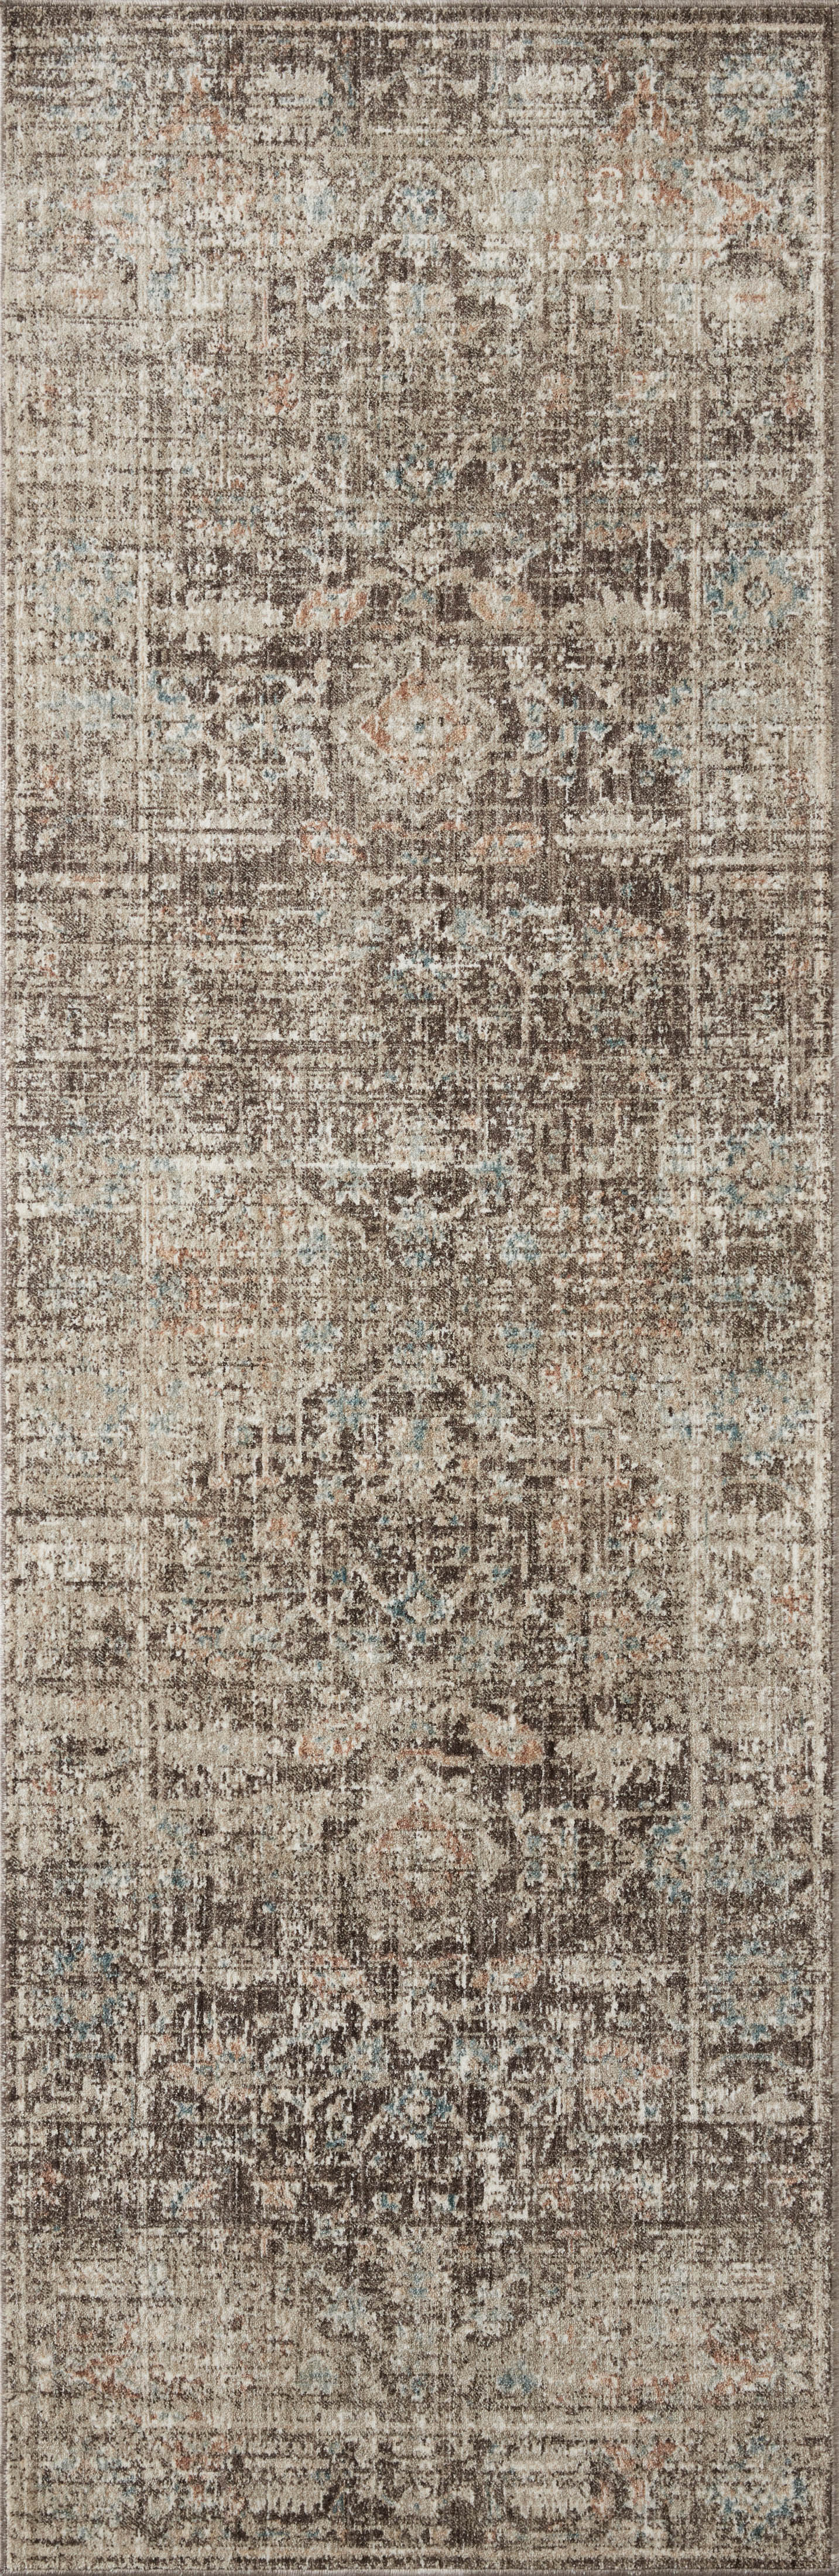 Loloi Millie Rug Collection - Charcoal / Dove - Magnolia Home by Joanna Gaines-Blue Hand Home